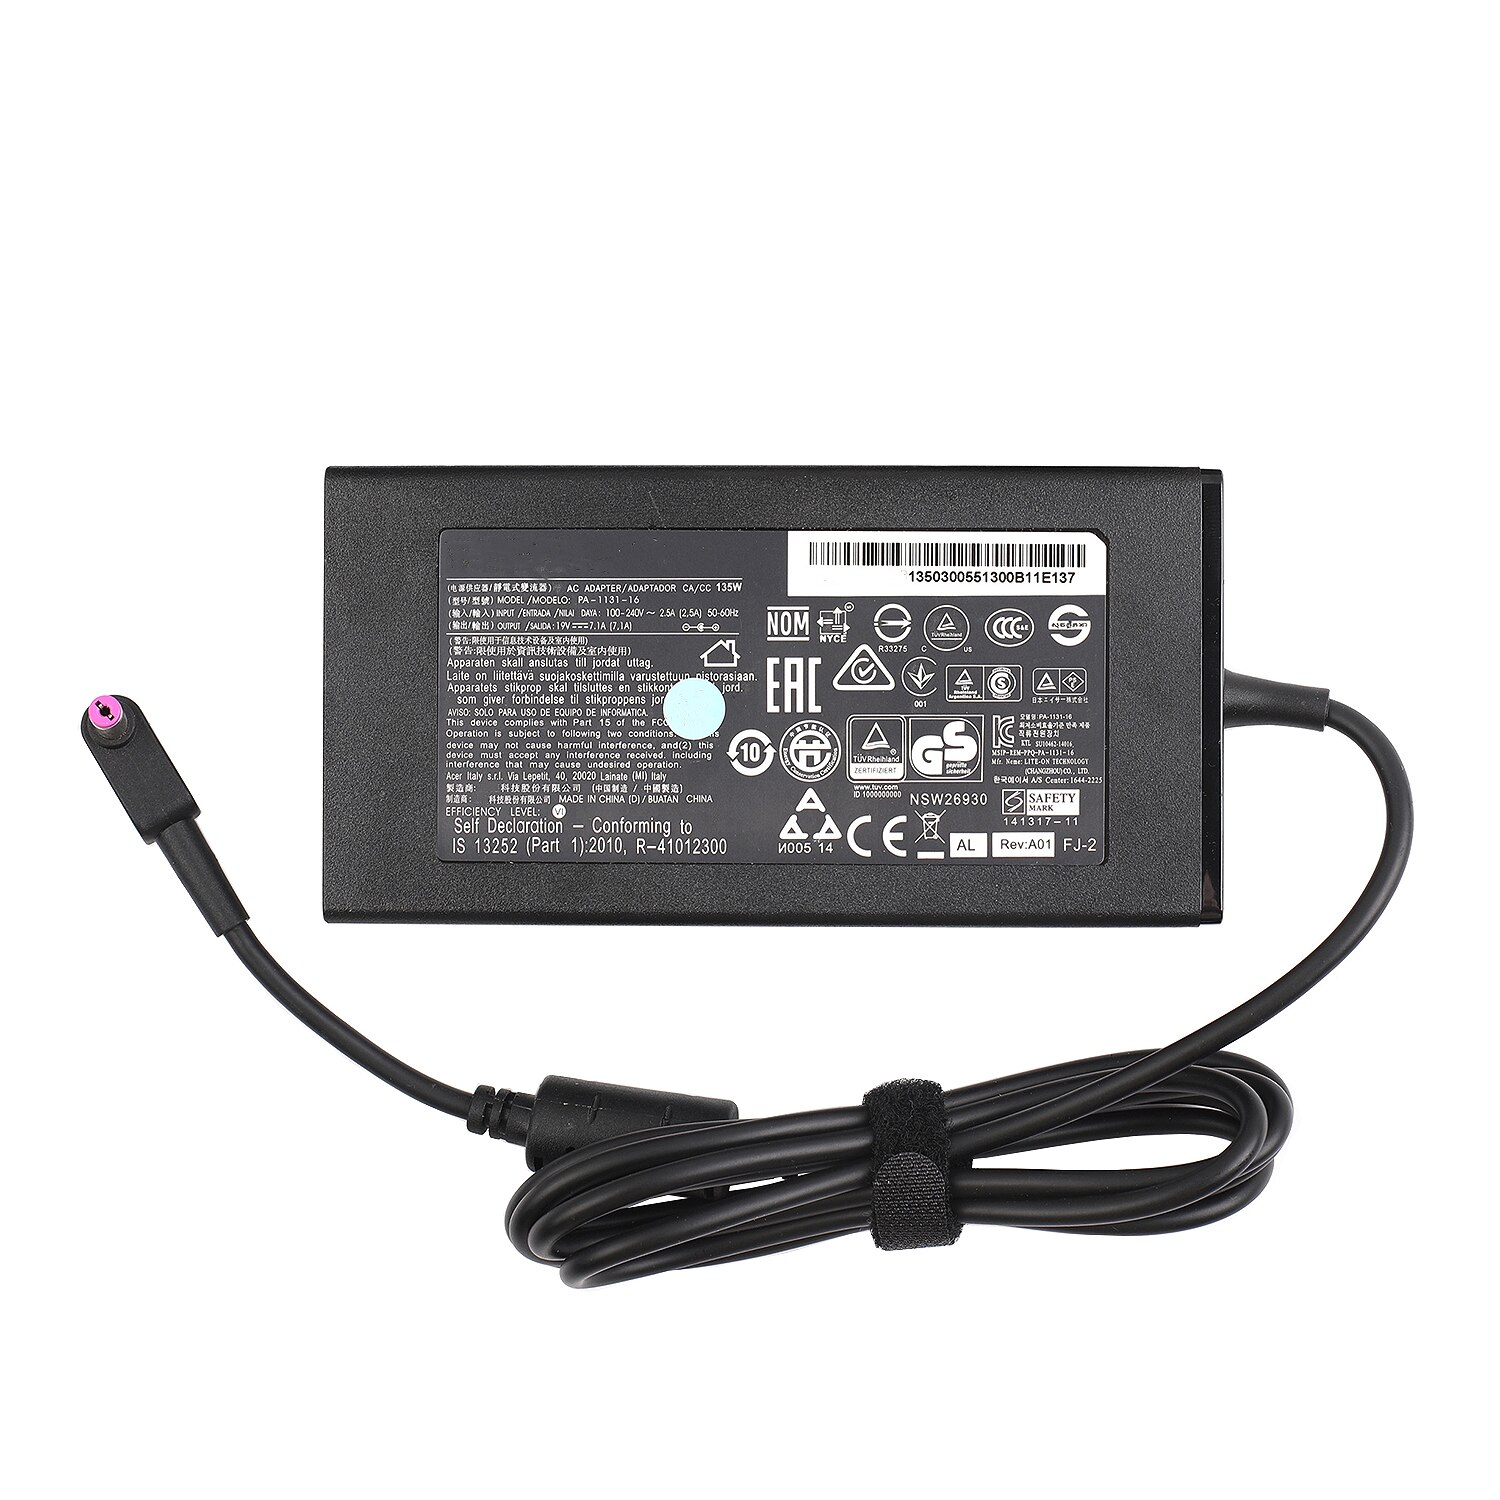 135W 19V 7.1A Laptop Voeding Voor Acer Nitro 5 AN515-53-55G9 AN515-53-52FA, nitro 5 AN515-51-79GN Ac Adapter Oplader 5.5Mm: No power cord